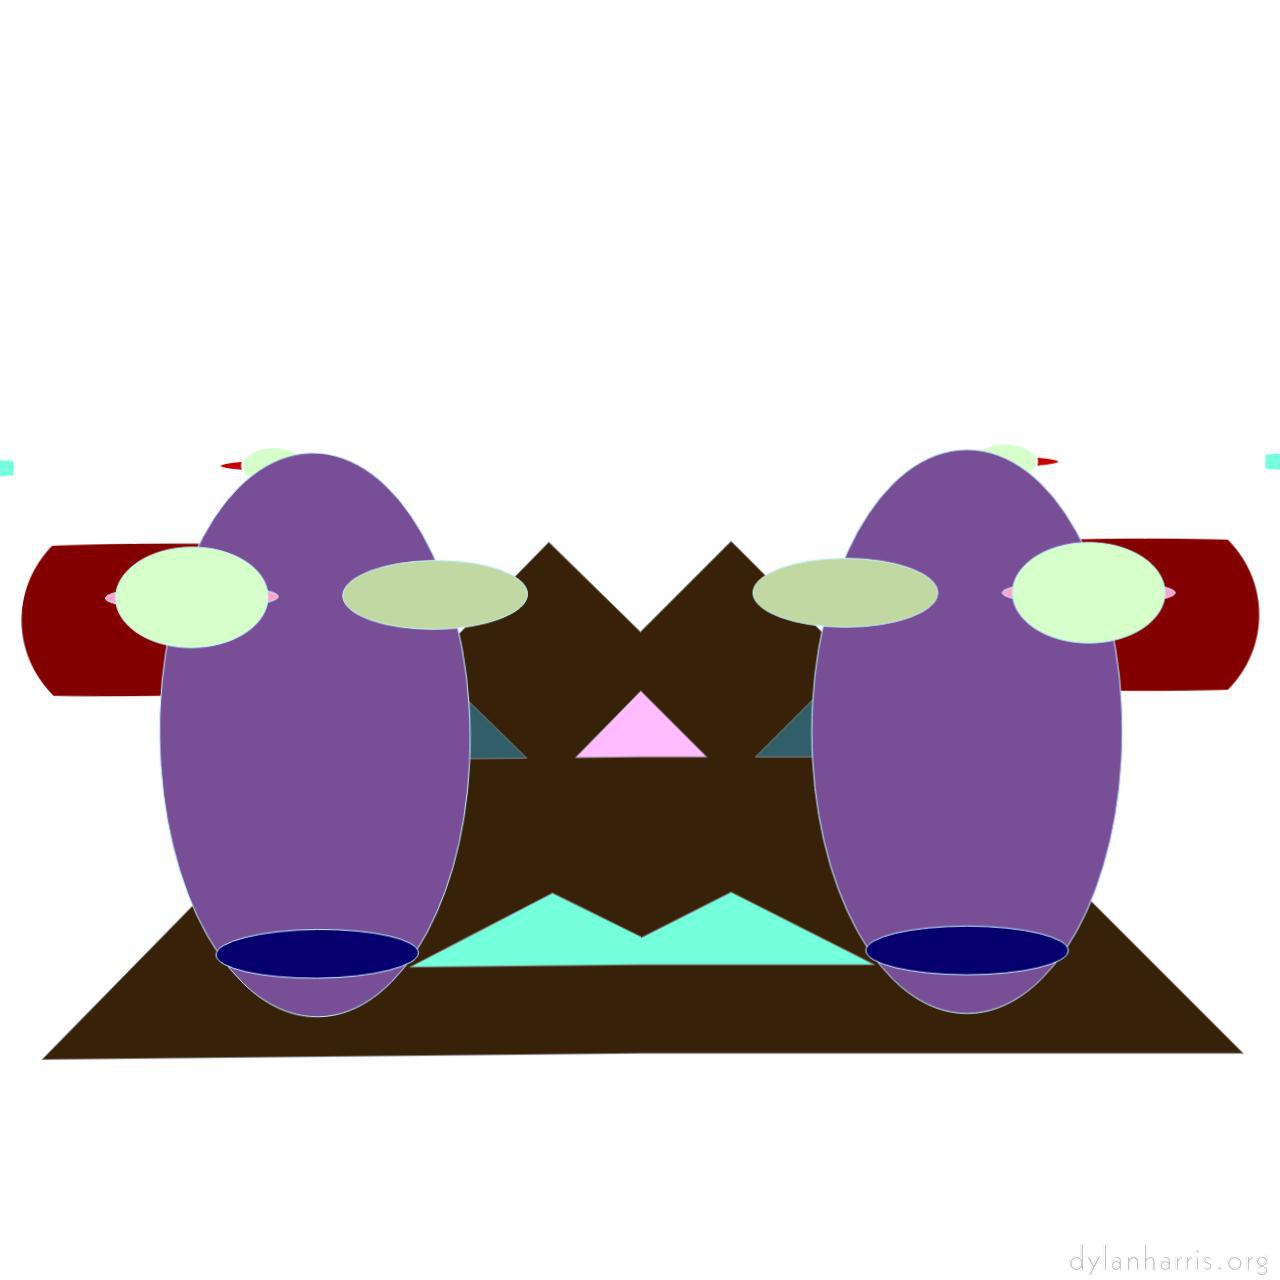 image: cartoon characters and shapes :: purple cows